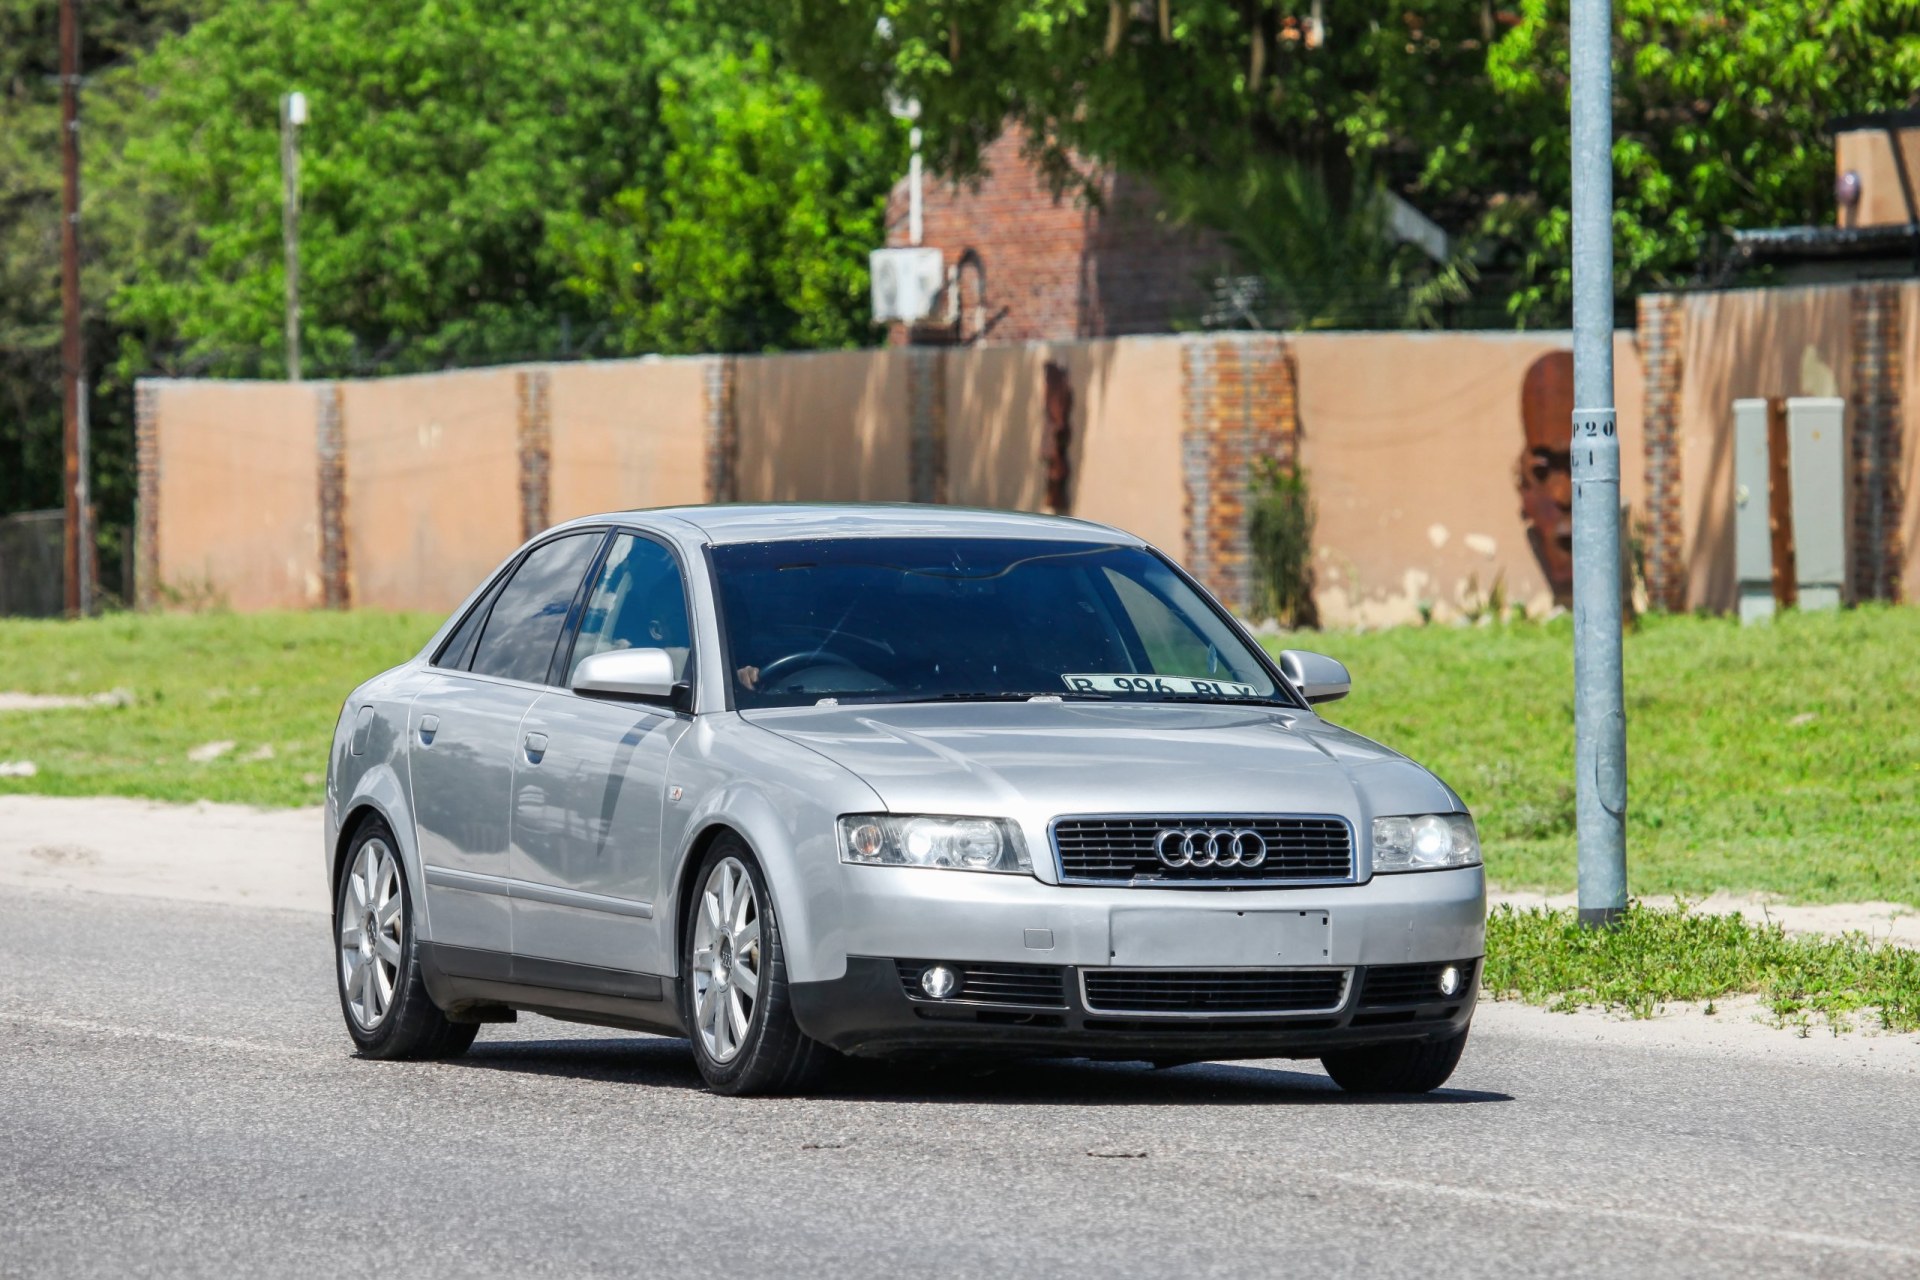 Used Audi A4 Saloon (2005 - 2007) Review